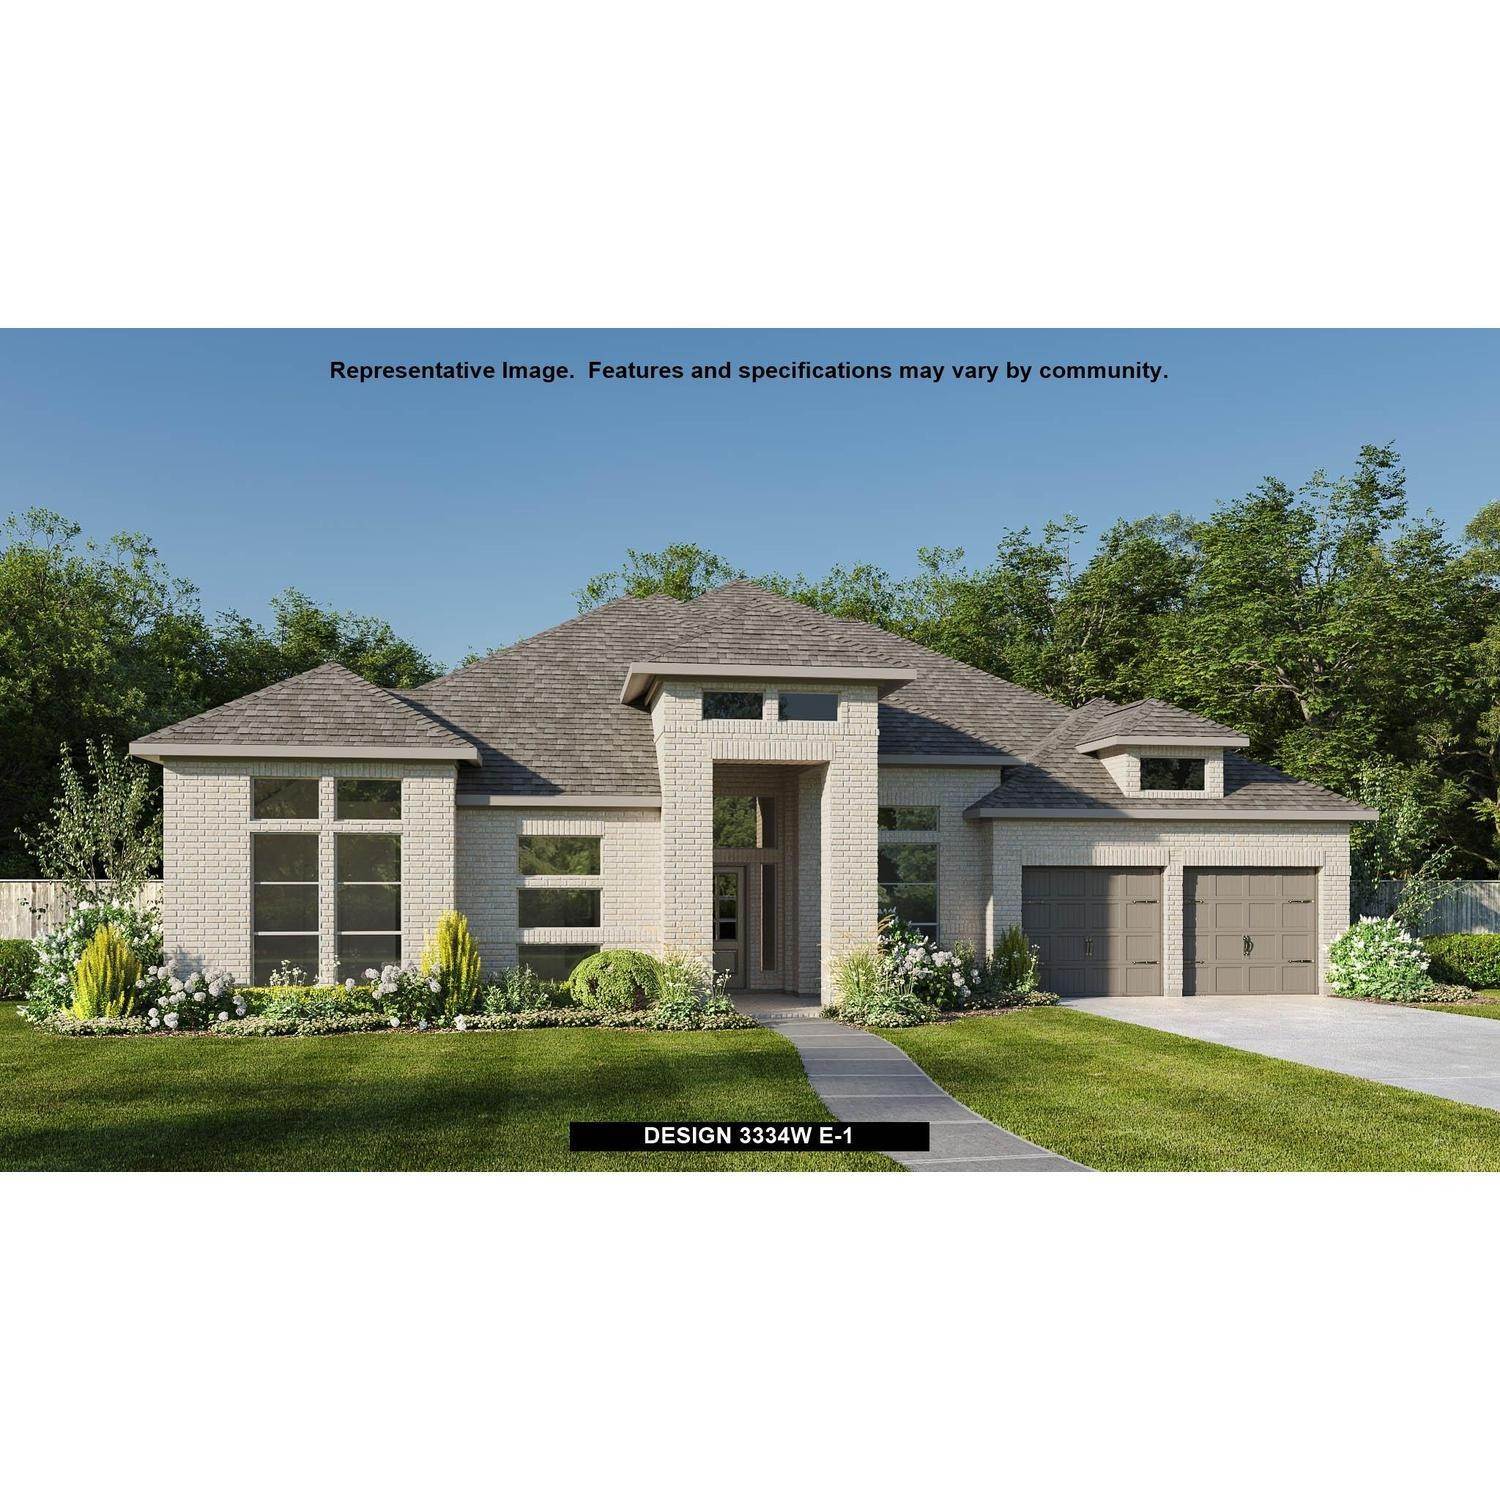 Single Family for Sale at Cane Island 80' 1914 Kessler Point Place, Katy, TX 77494